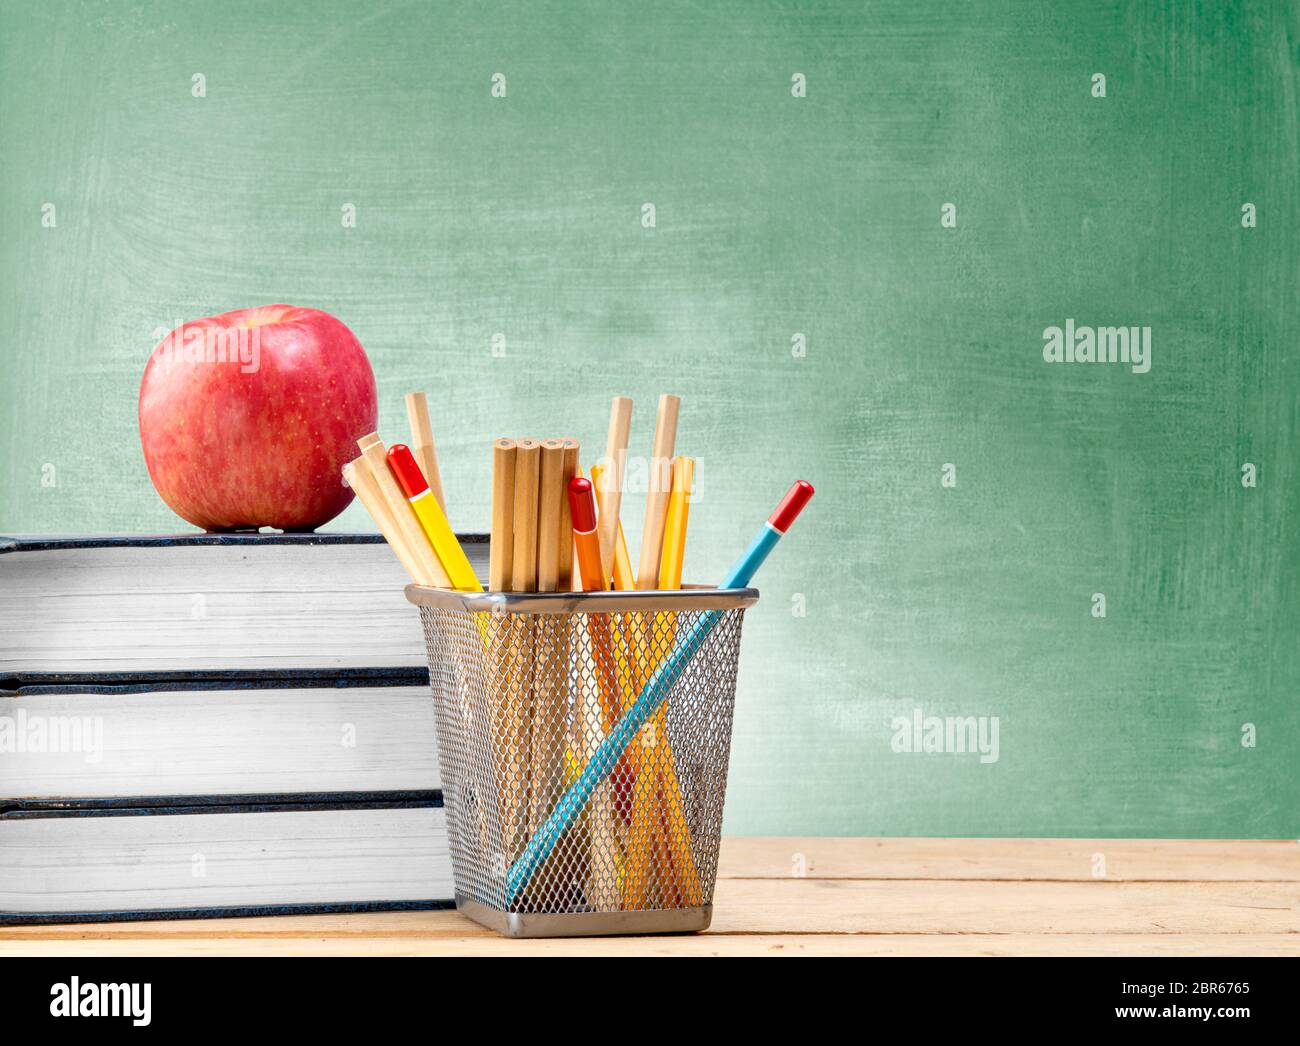 School objects for students. Chalkboard, pencils, crayons and apple Stock  Photo - Alamy